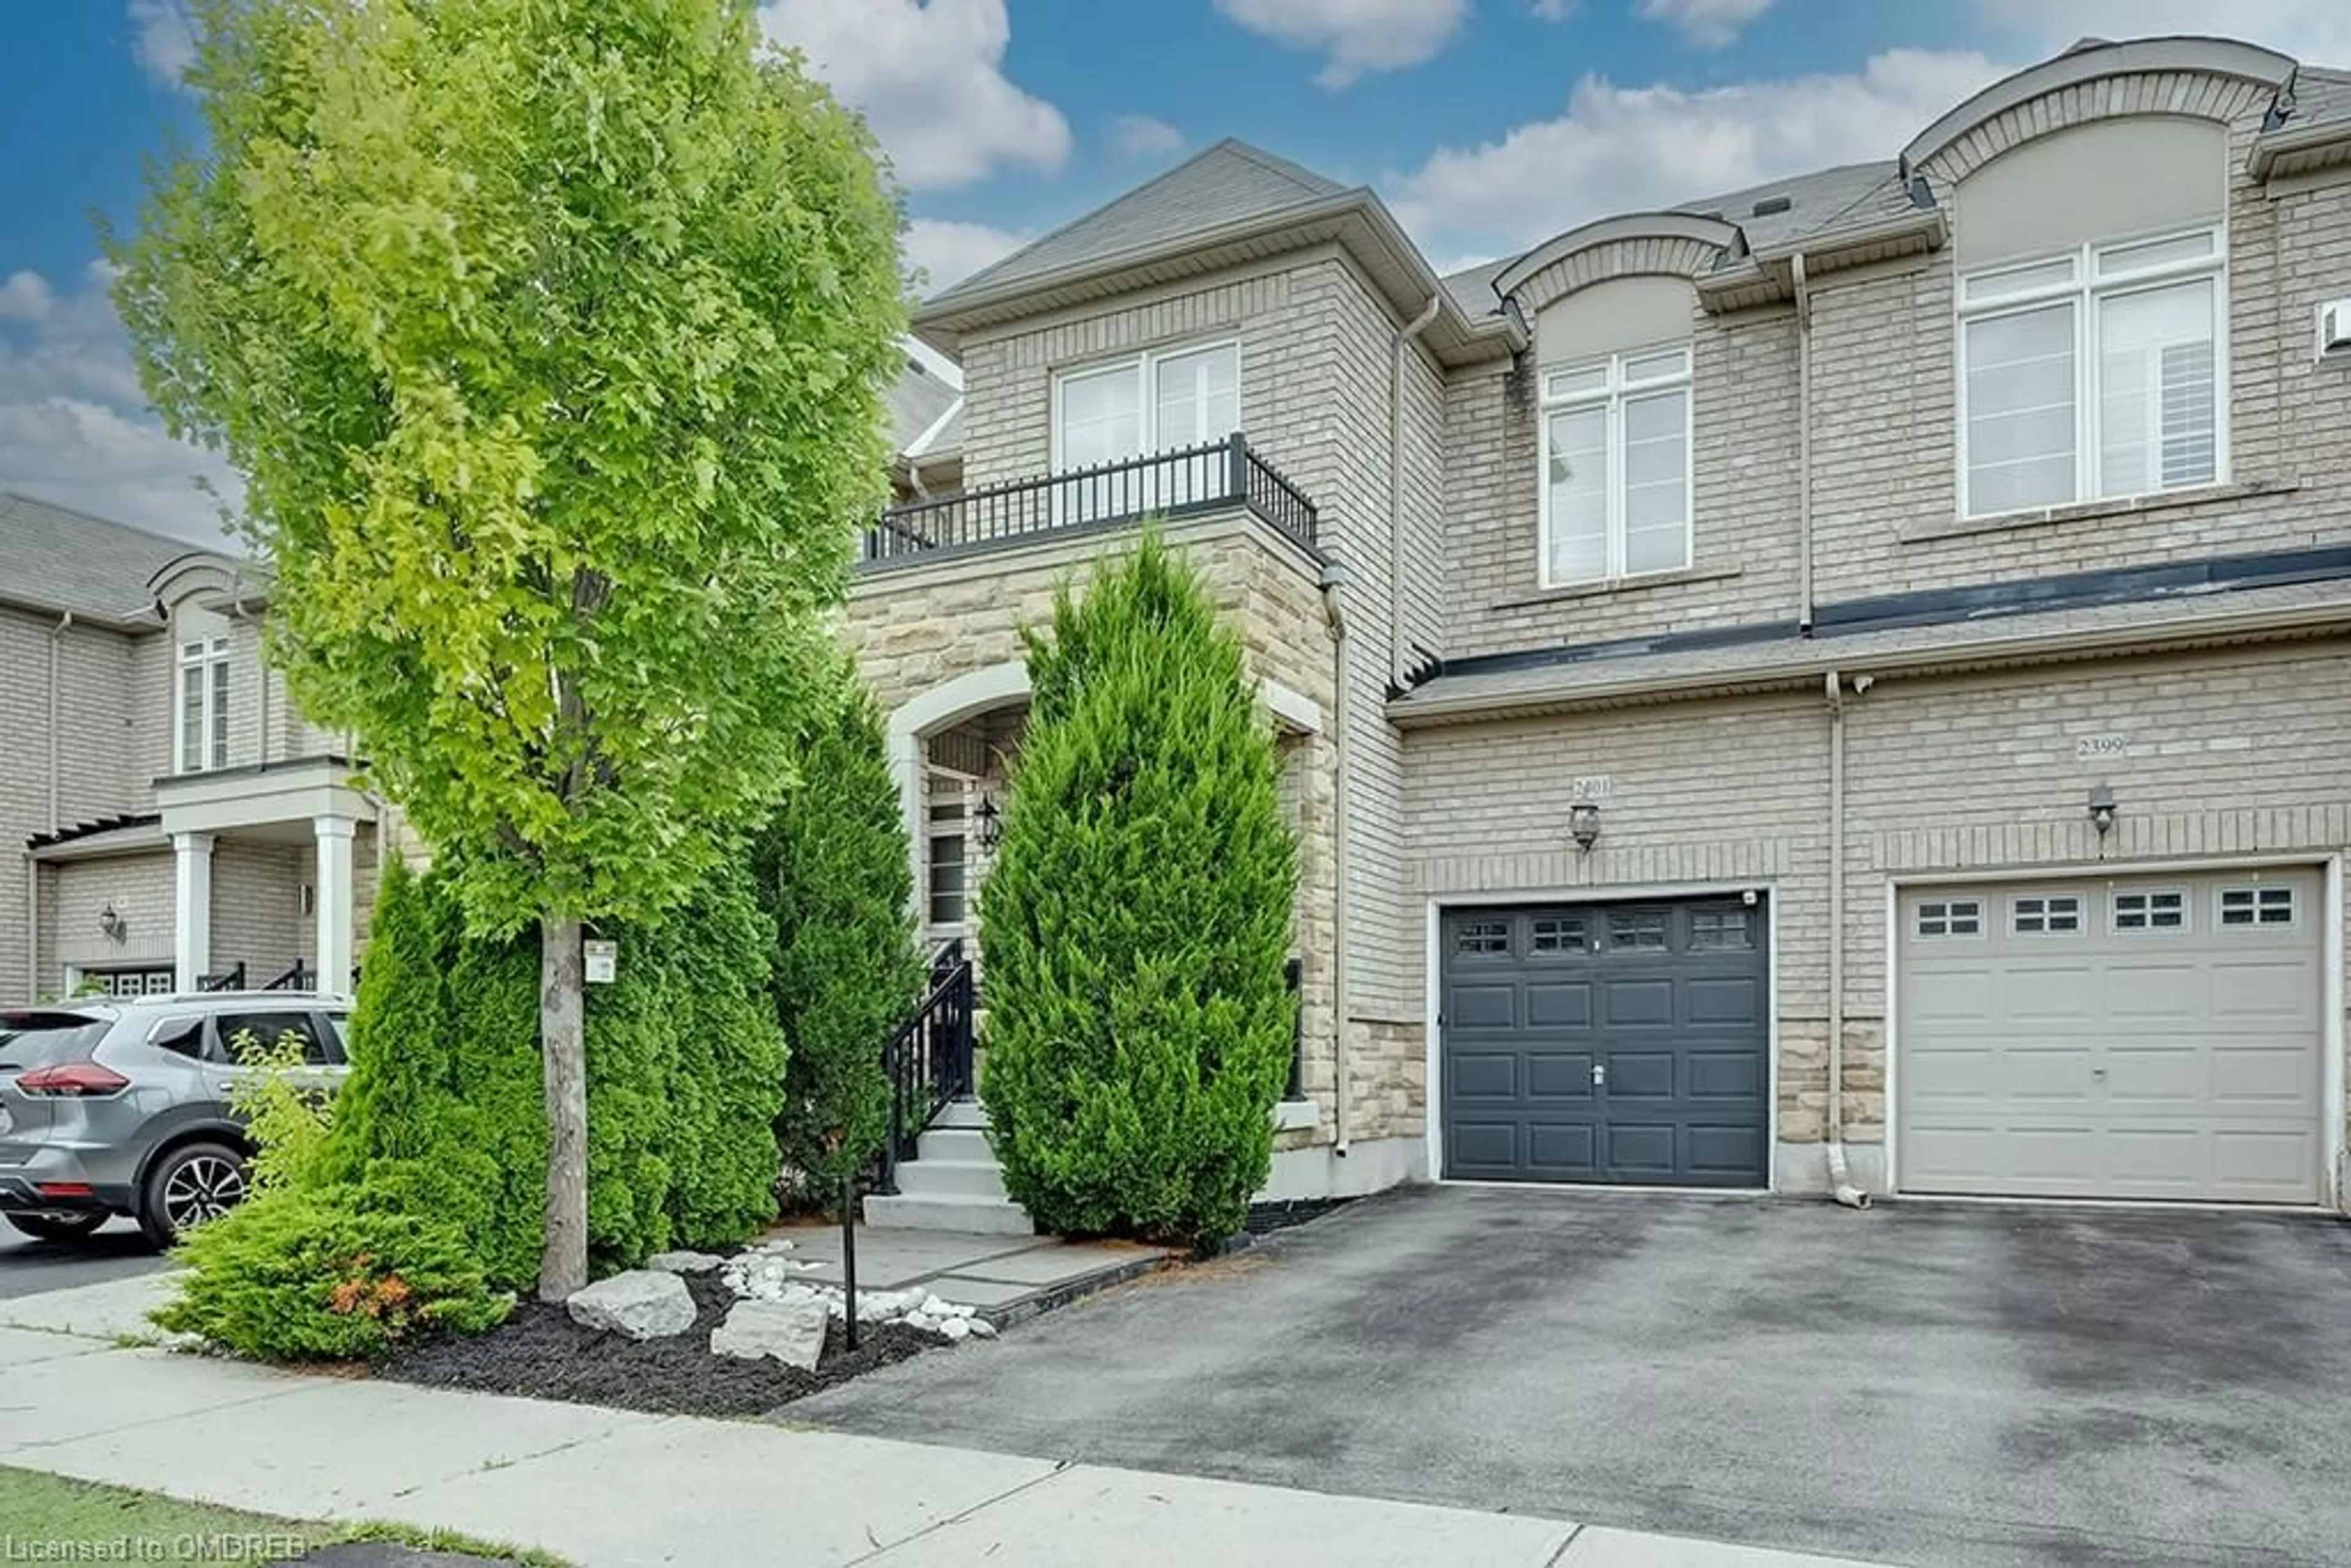 A pic from exterior of the house or condo for 2401 Old Brompton Way, Oakville Ontario L6M 0J3